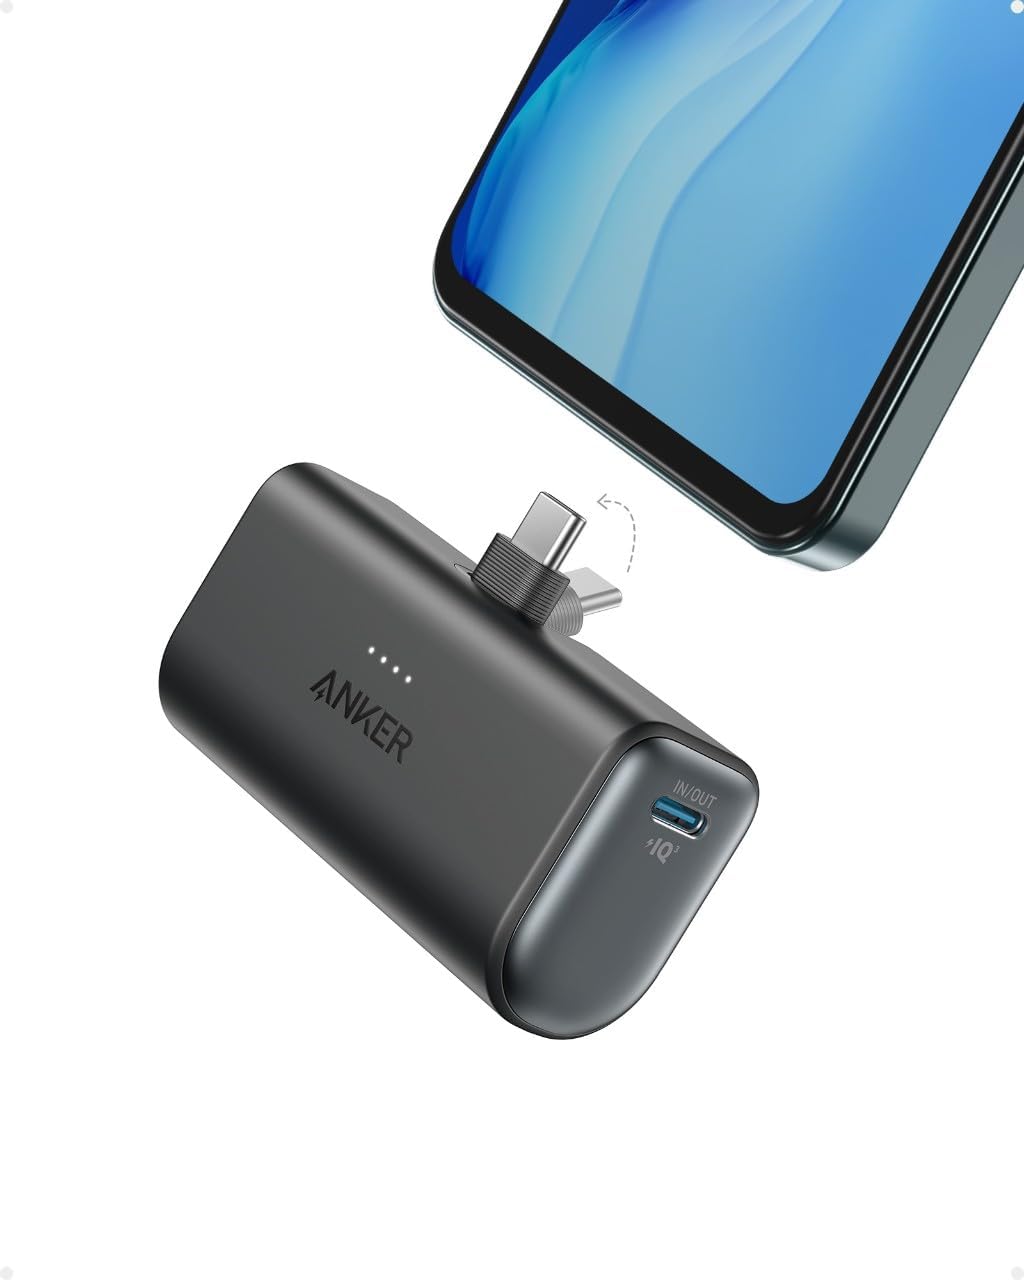 Anker Expands Nano Series of USB-C Charging Accessories